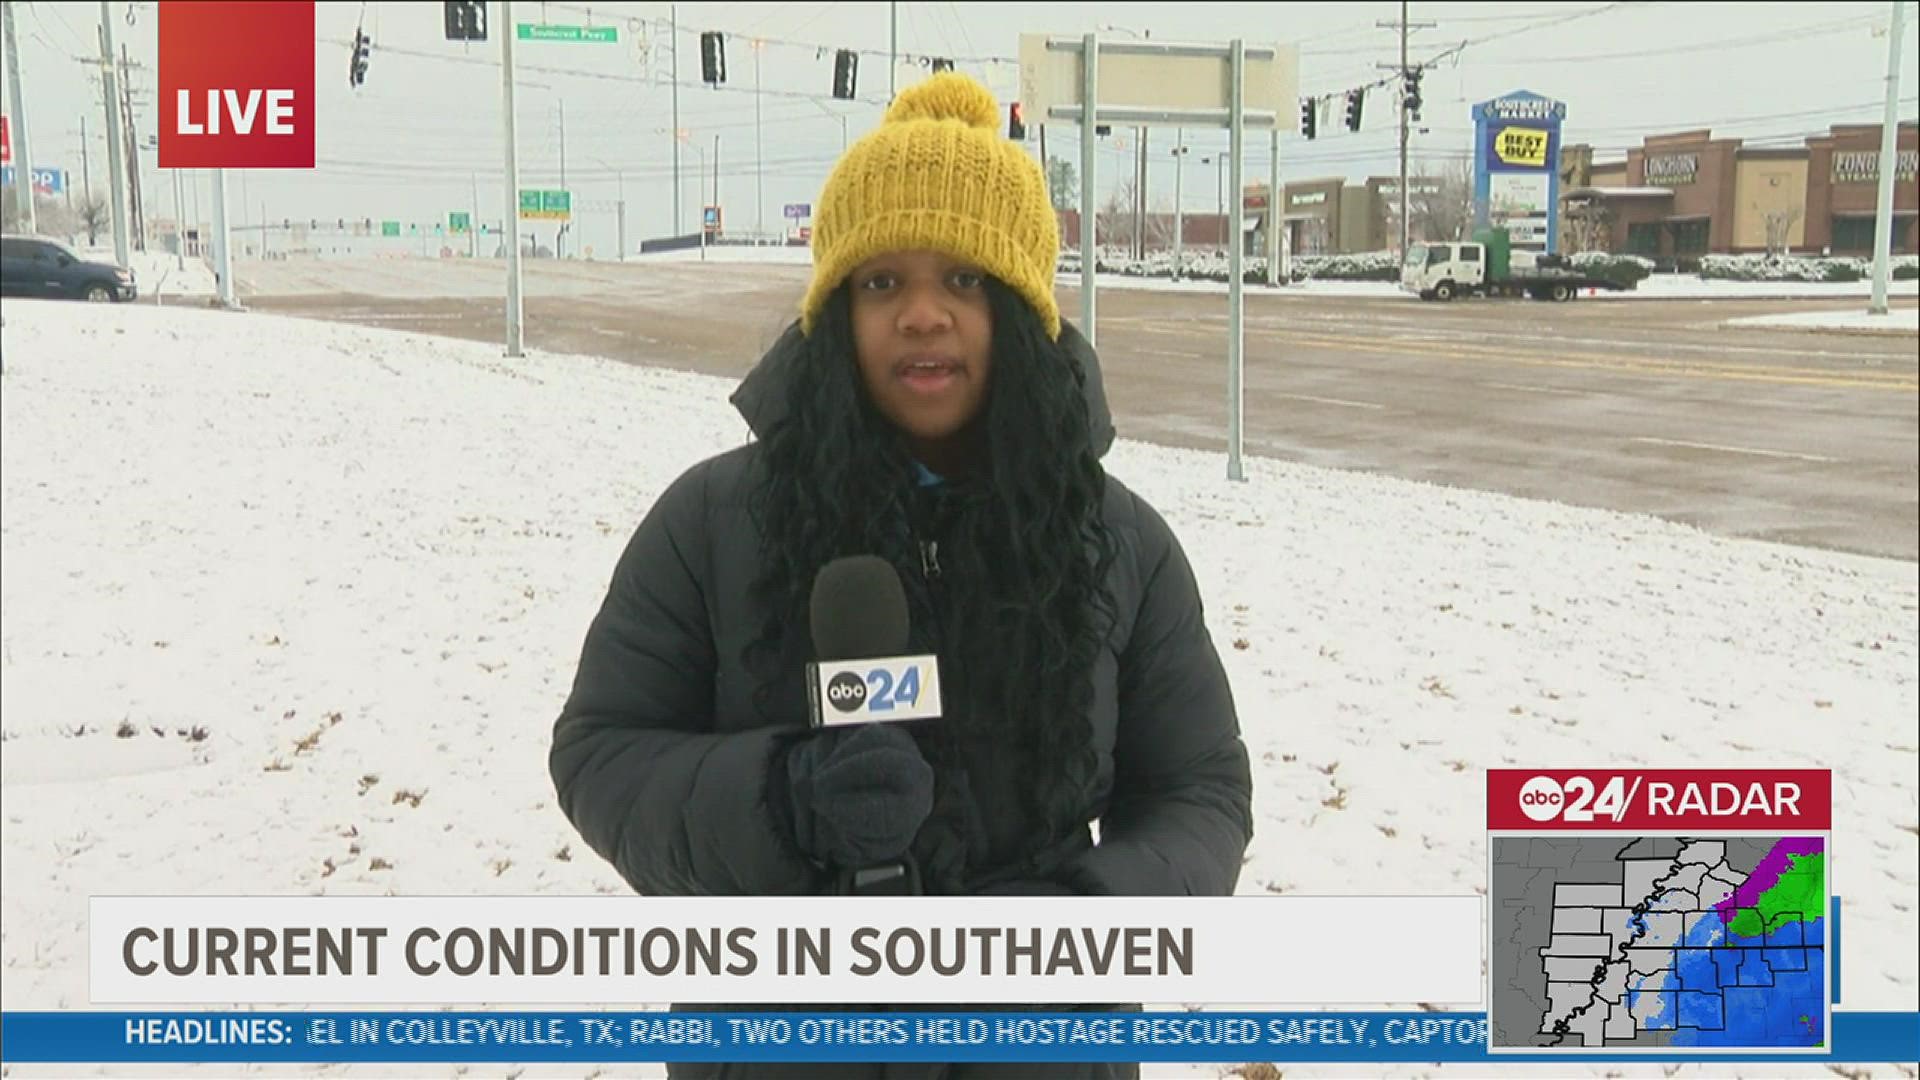 Brittni Clemons and Danielle Moss have updates on road conditions across the area after an early morning snow.